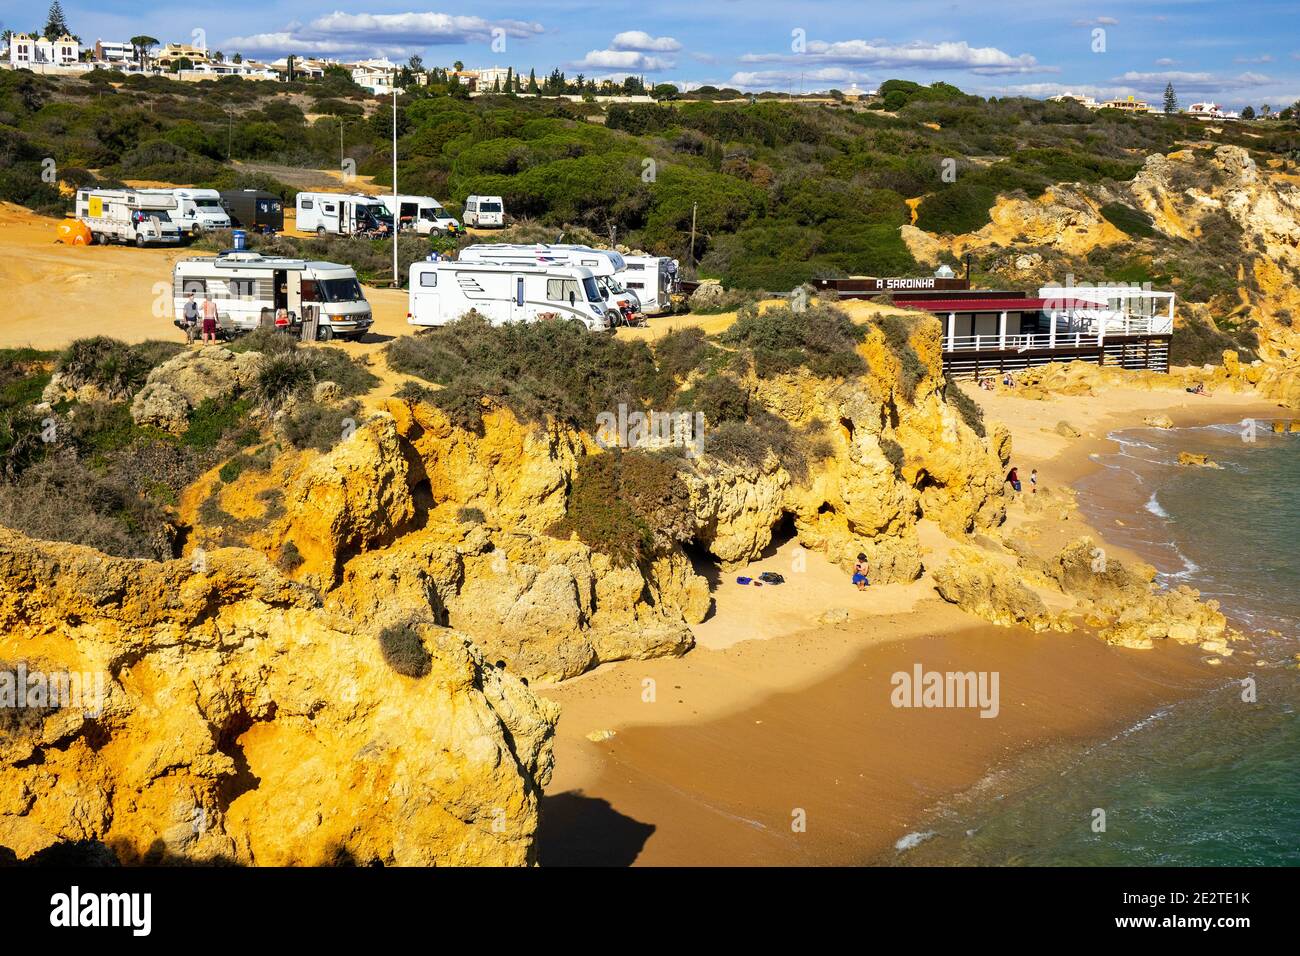 People Wild Camping With RV Motor Homes Camper Vans On The Cliffs At Praia  Sao Rafael Near Albufeira In The Algarve Portugal Stock Photo - Alamy